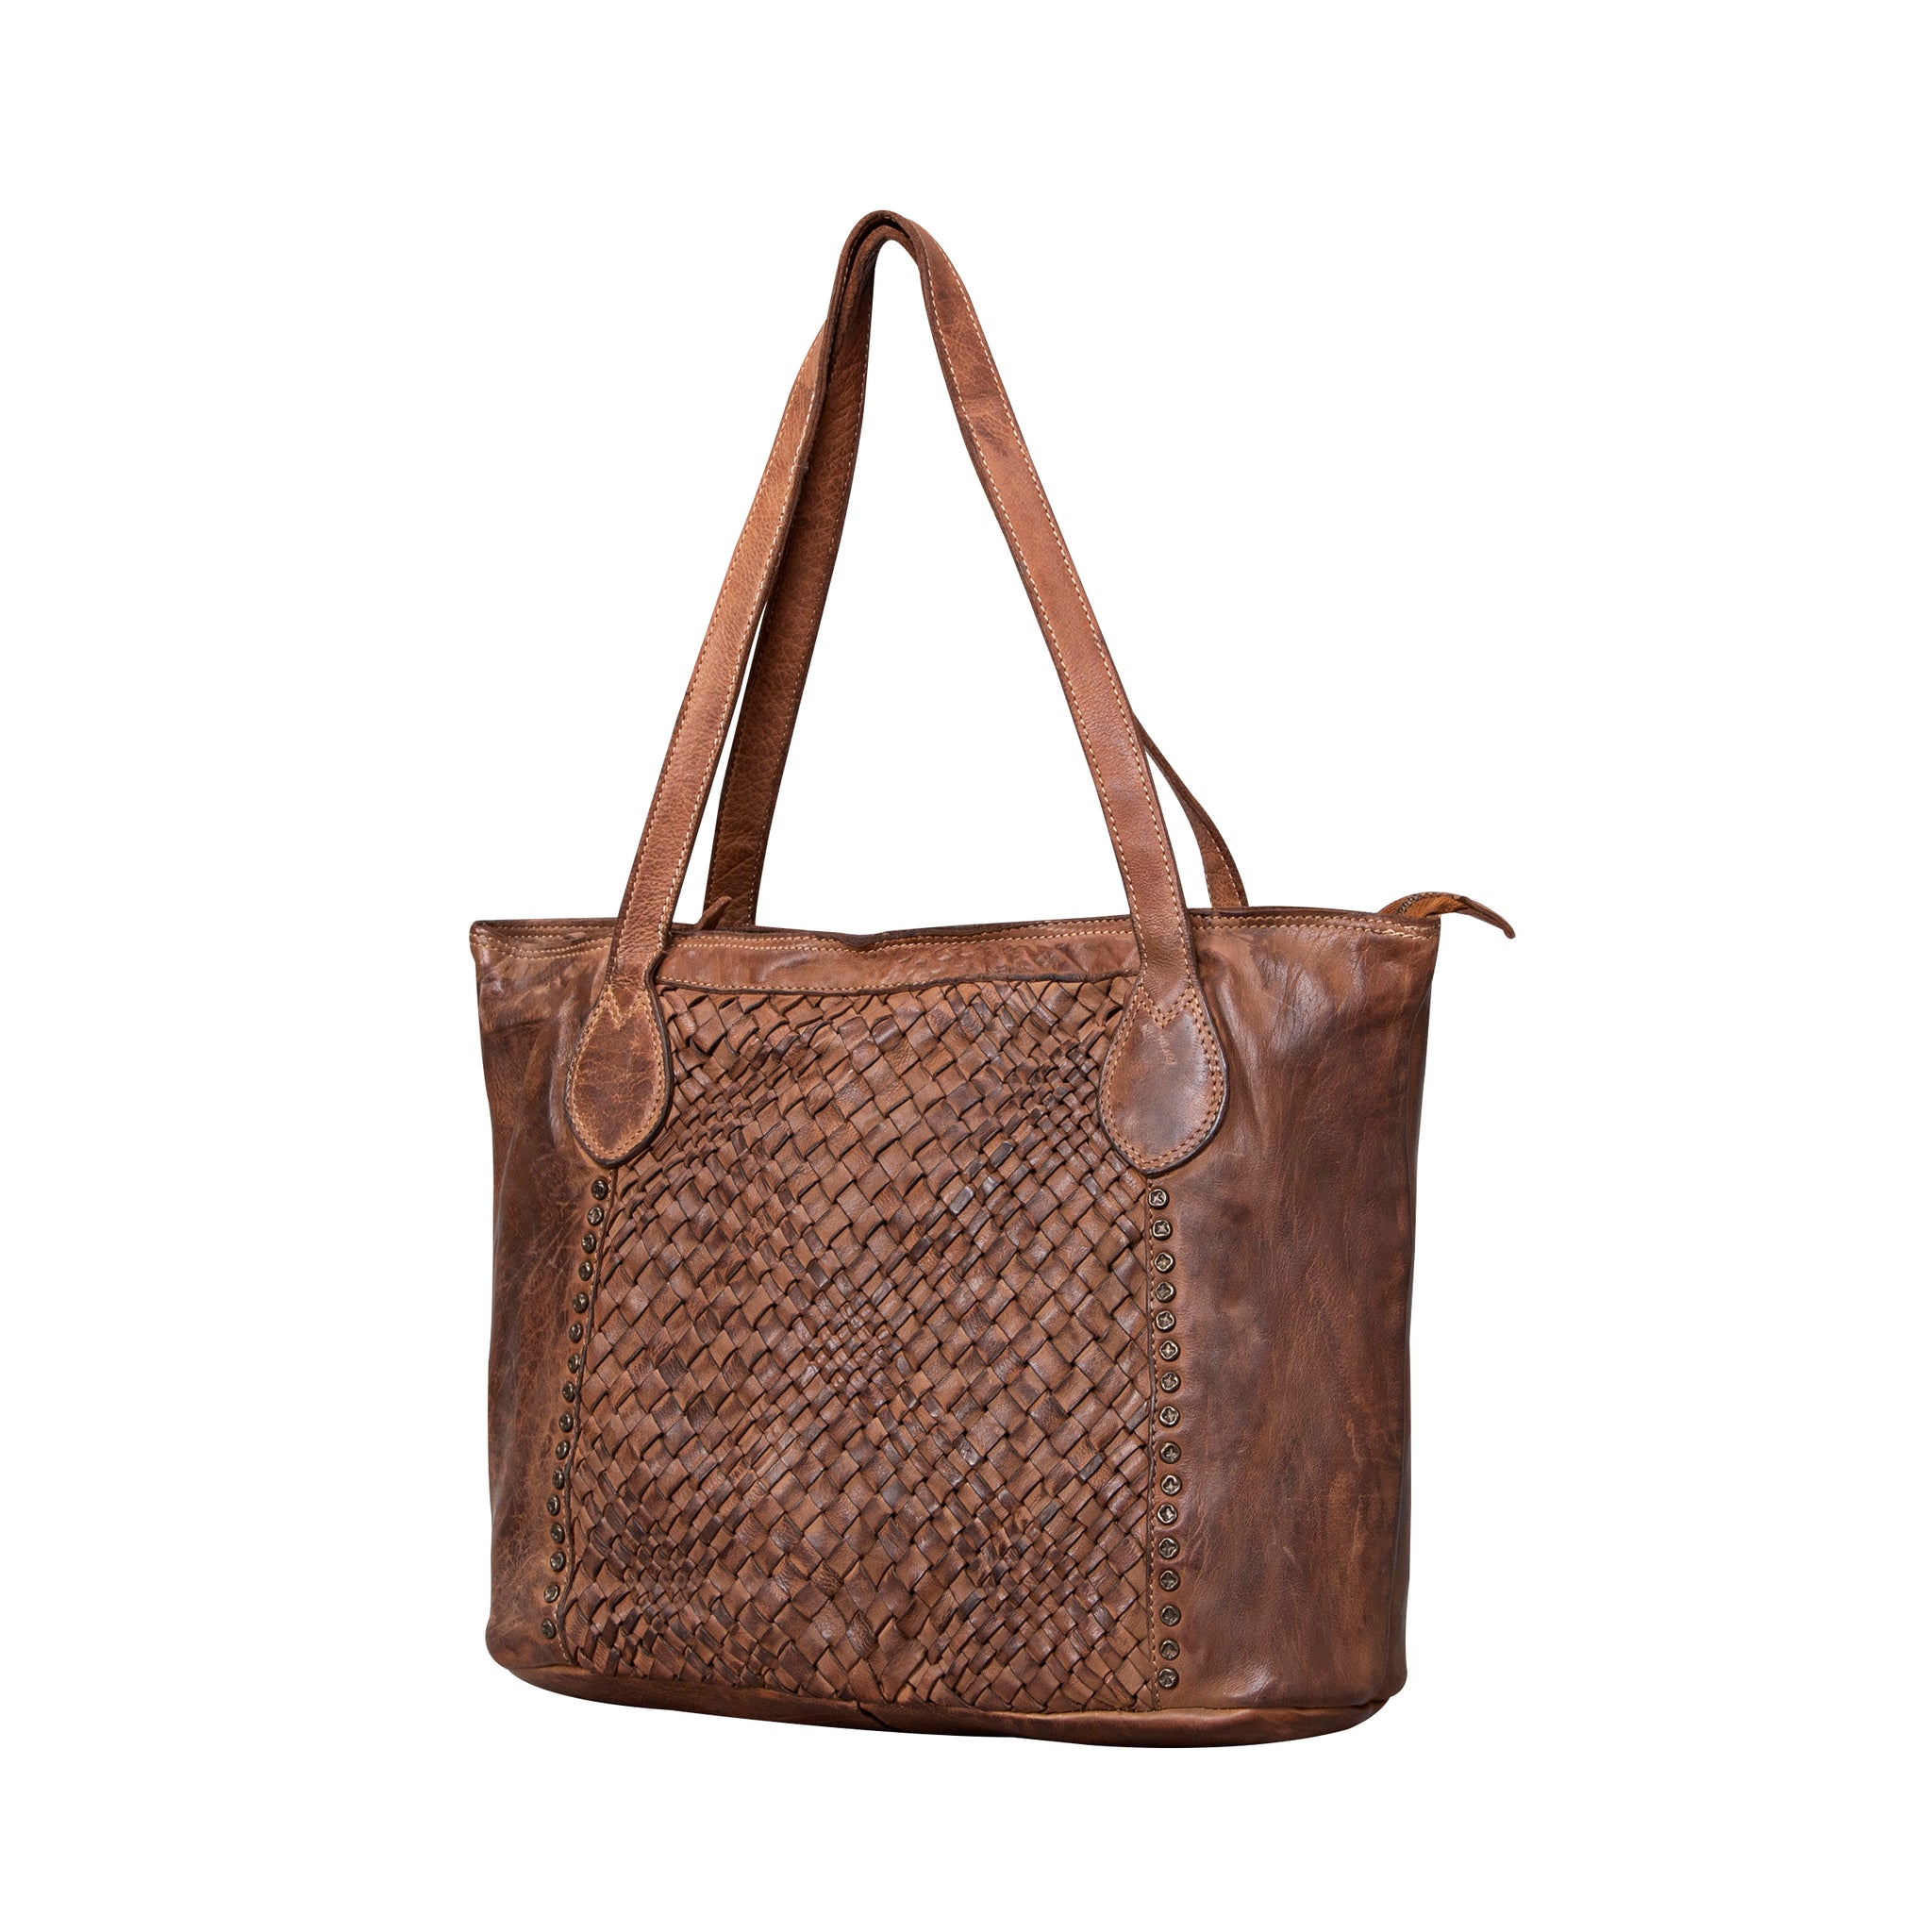 Harness Skirting Leather With Hand Carving Tote Bag - NMBGM103